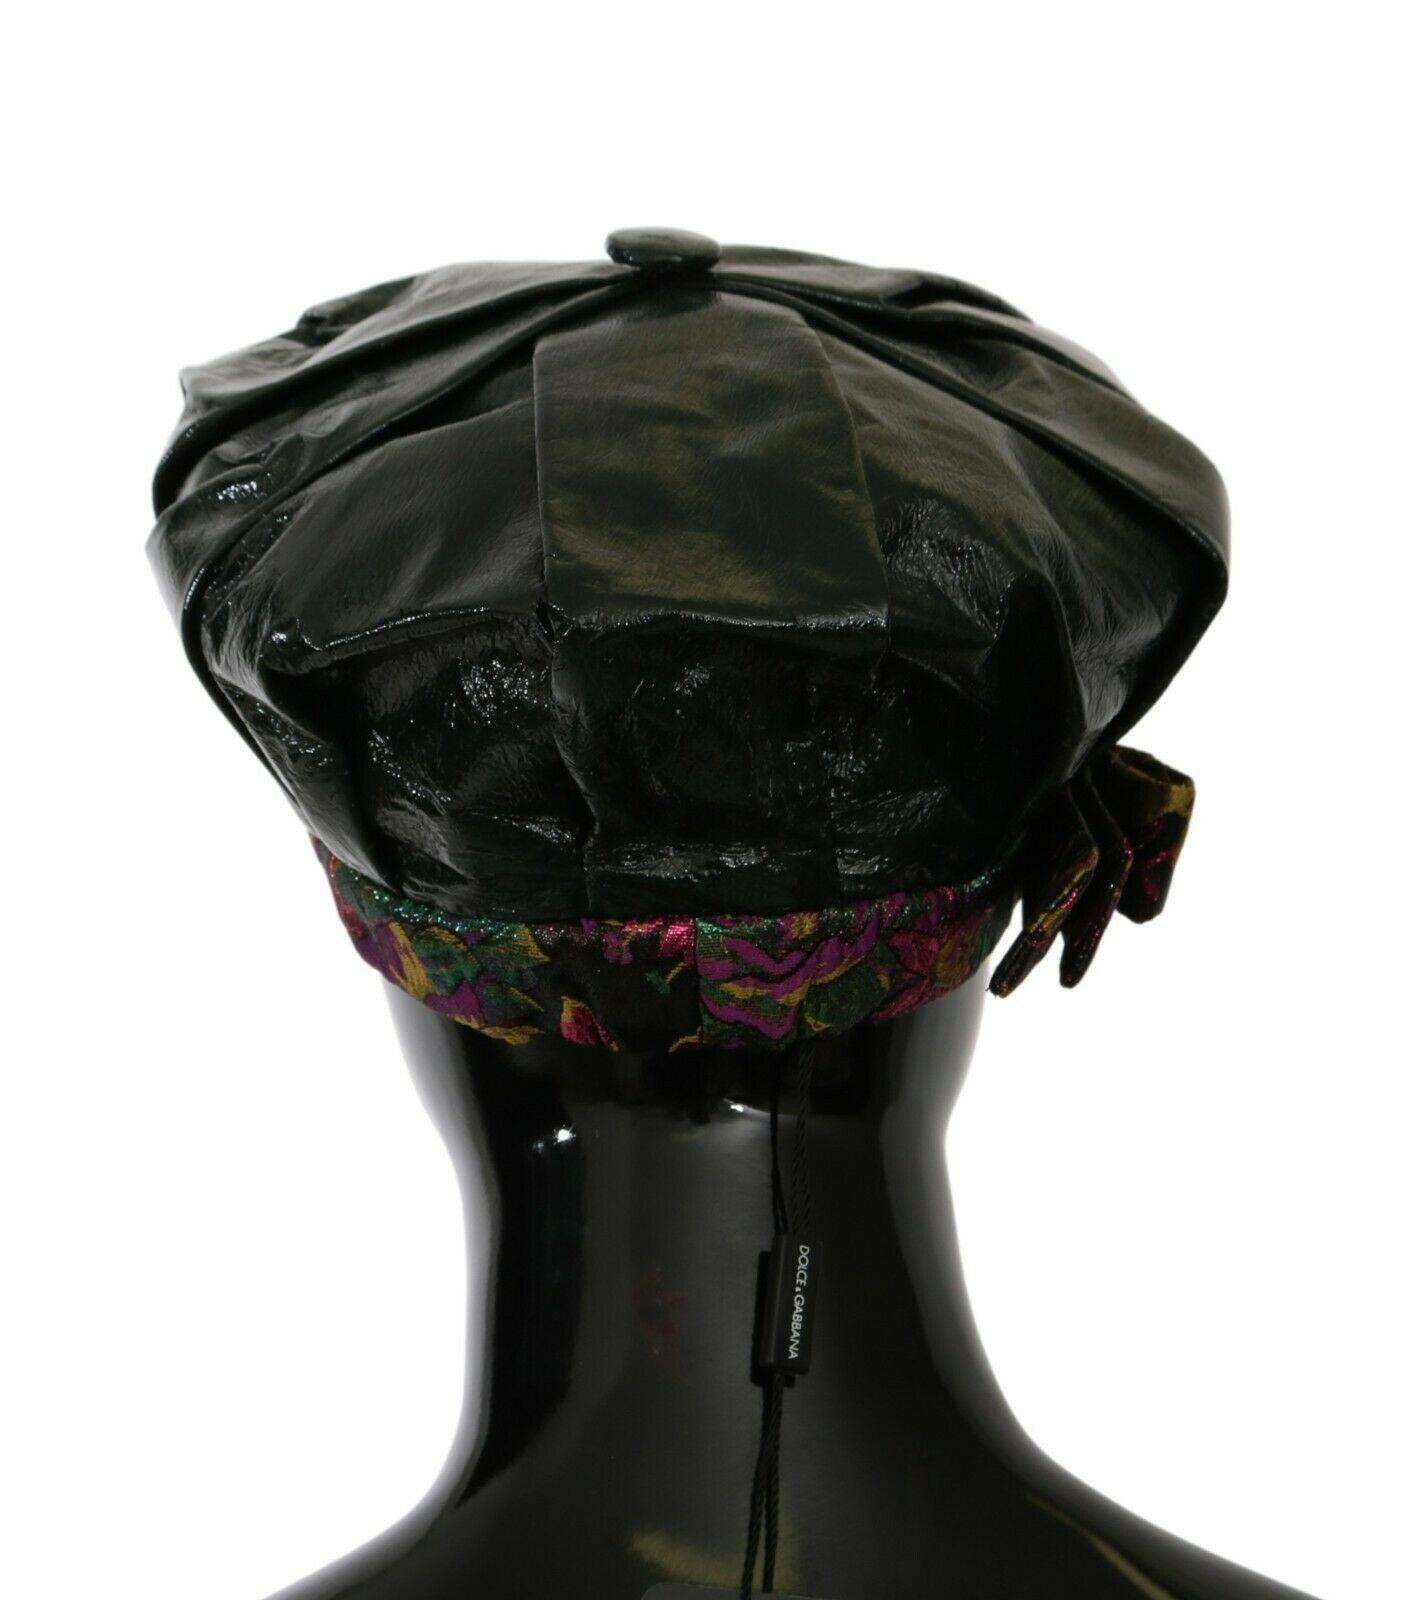 Black Lamb Leather Floral Print Beret Hat - Designed by Dolce & Gabbana Available to Buy at a Discounted Price on Moon Behind The Hill Online Designer Discount Store